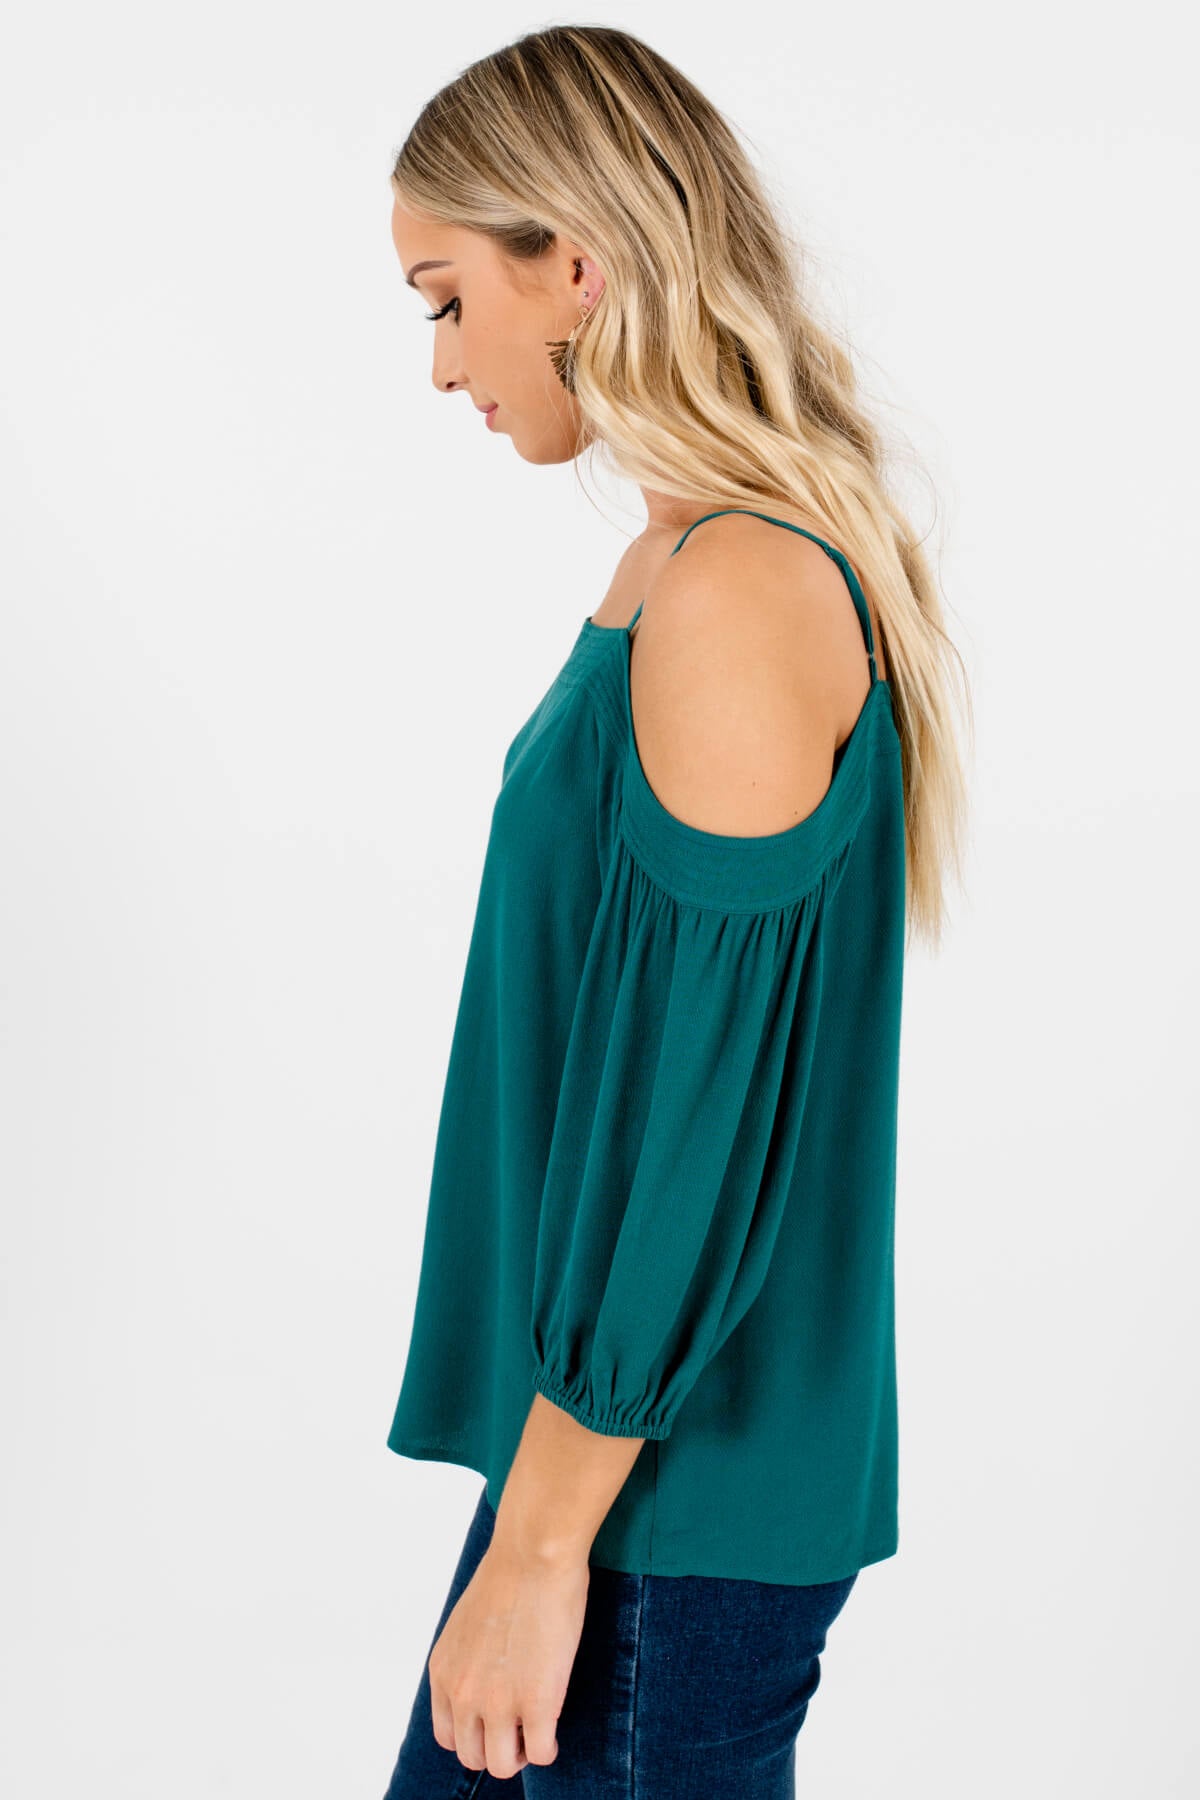 Women's Teal Green High-Quality Lightweight Material Cold Shoulder Boutique Tops